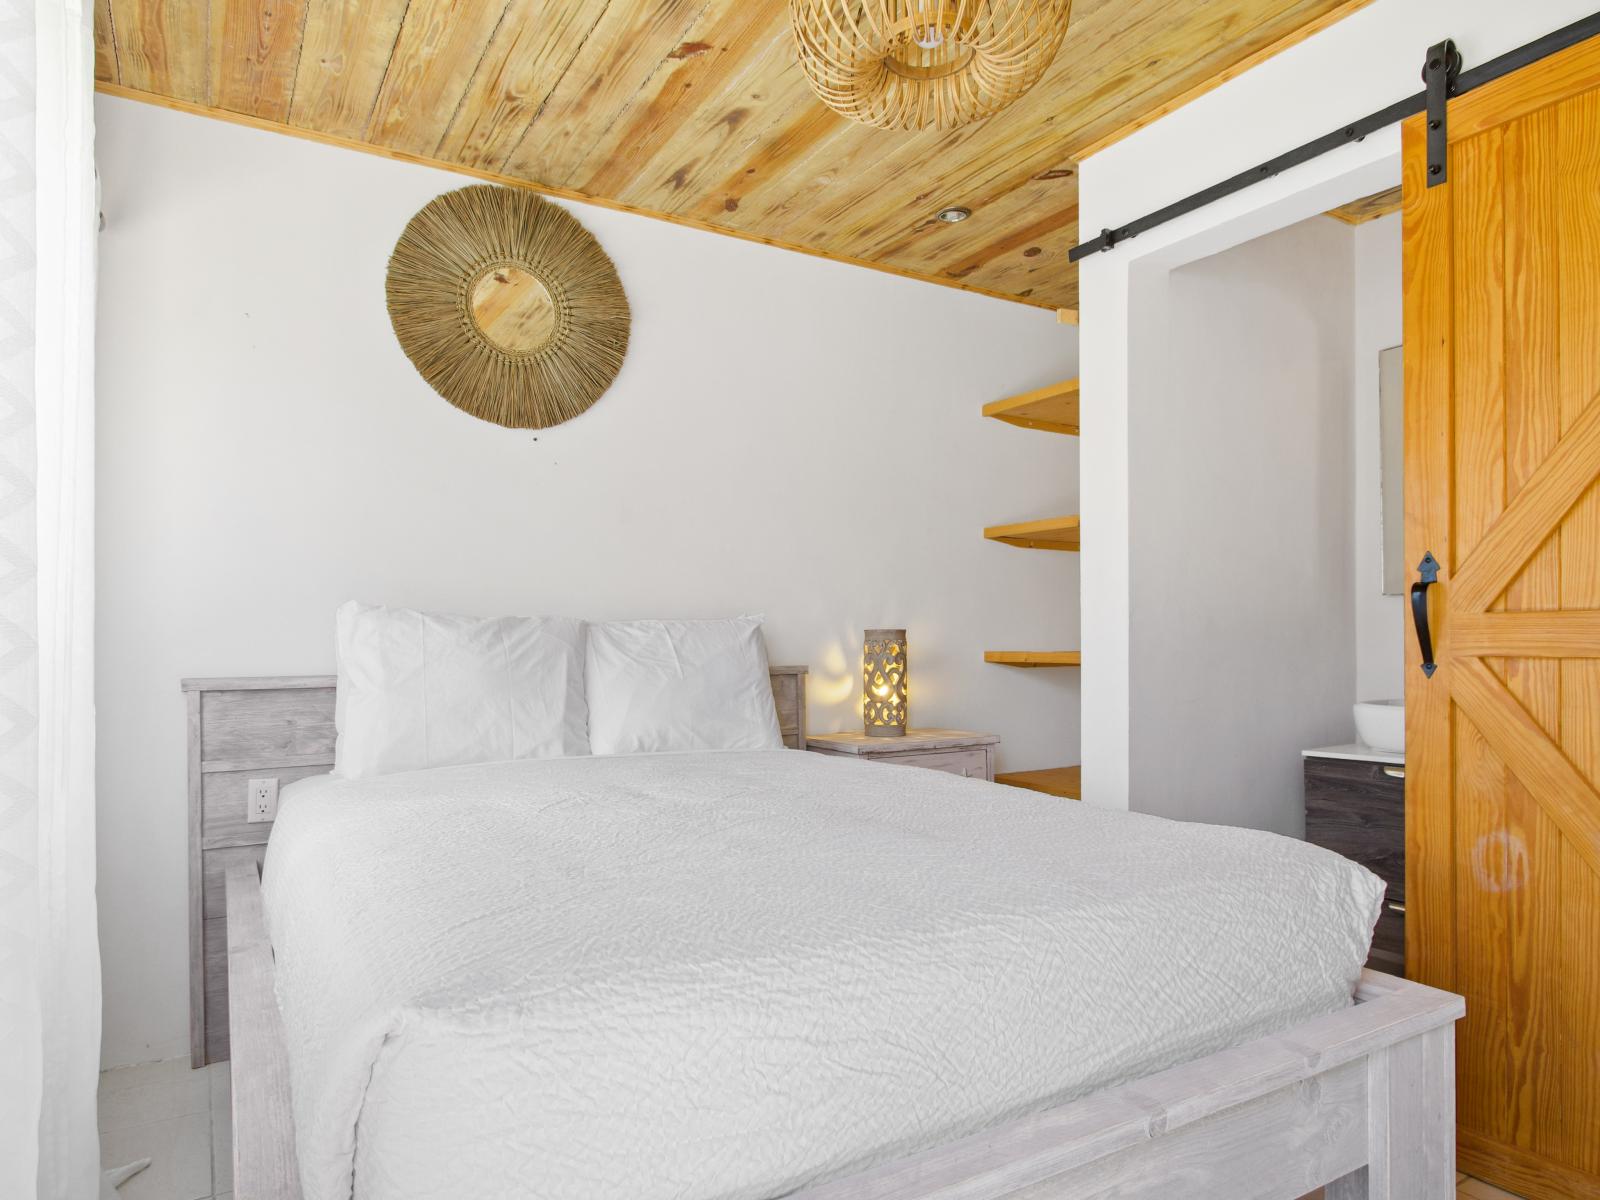 Lofty Bedroom of the Apartment in Nrood Aruba - Cozy retreat with a plush bed, perfect for relaxation - Bright and airy bedroom with large windows for natural illumination - Modern and stylish decor that complements the space